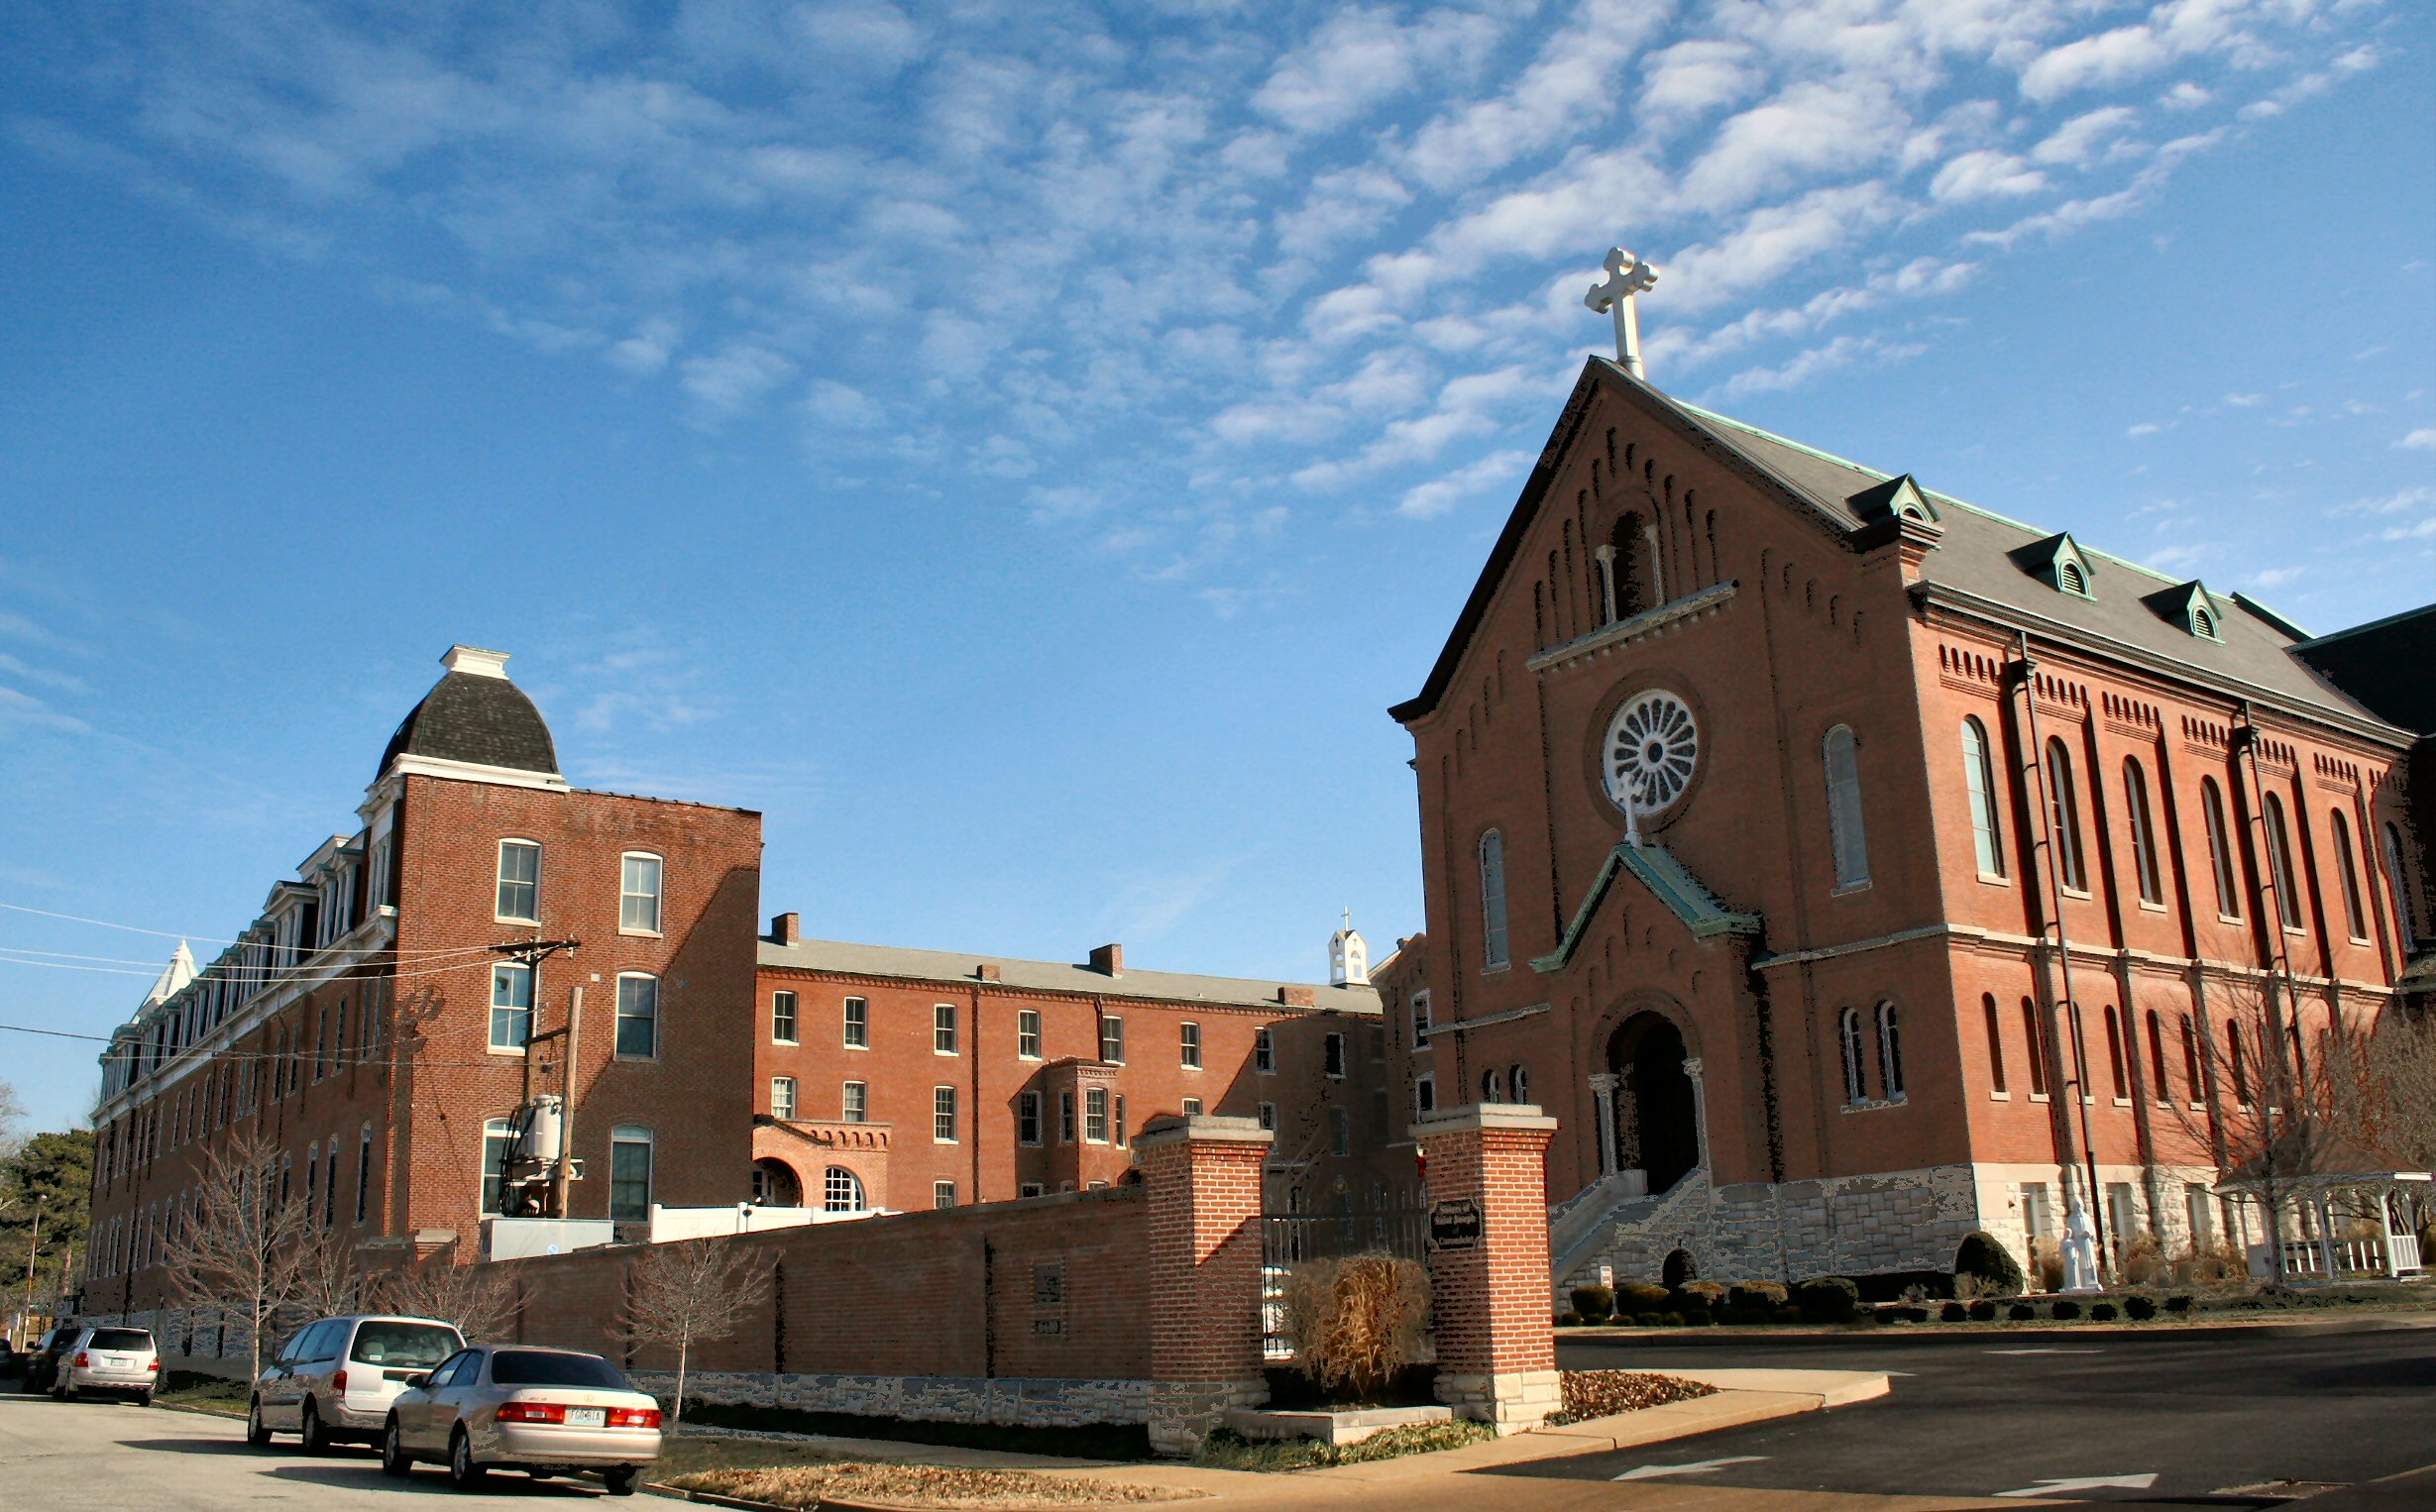 Convent of the Sisters of St. Joseph